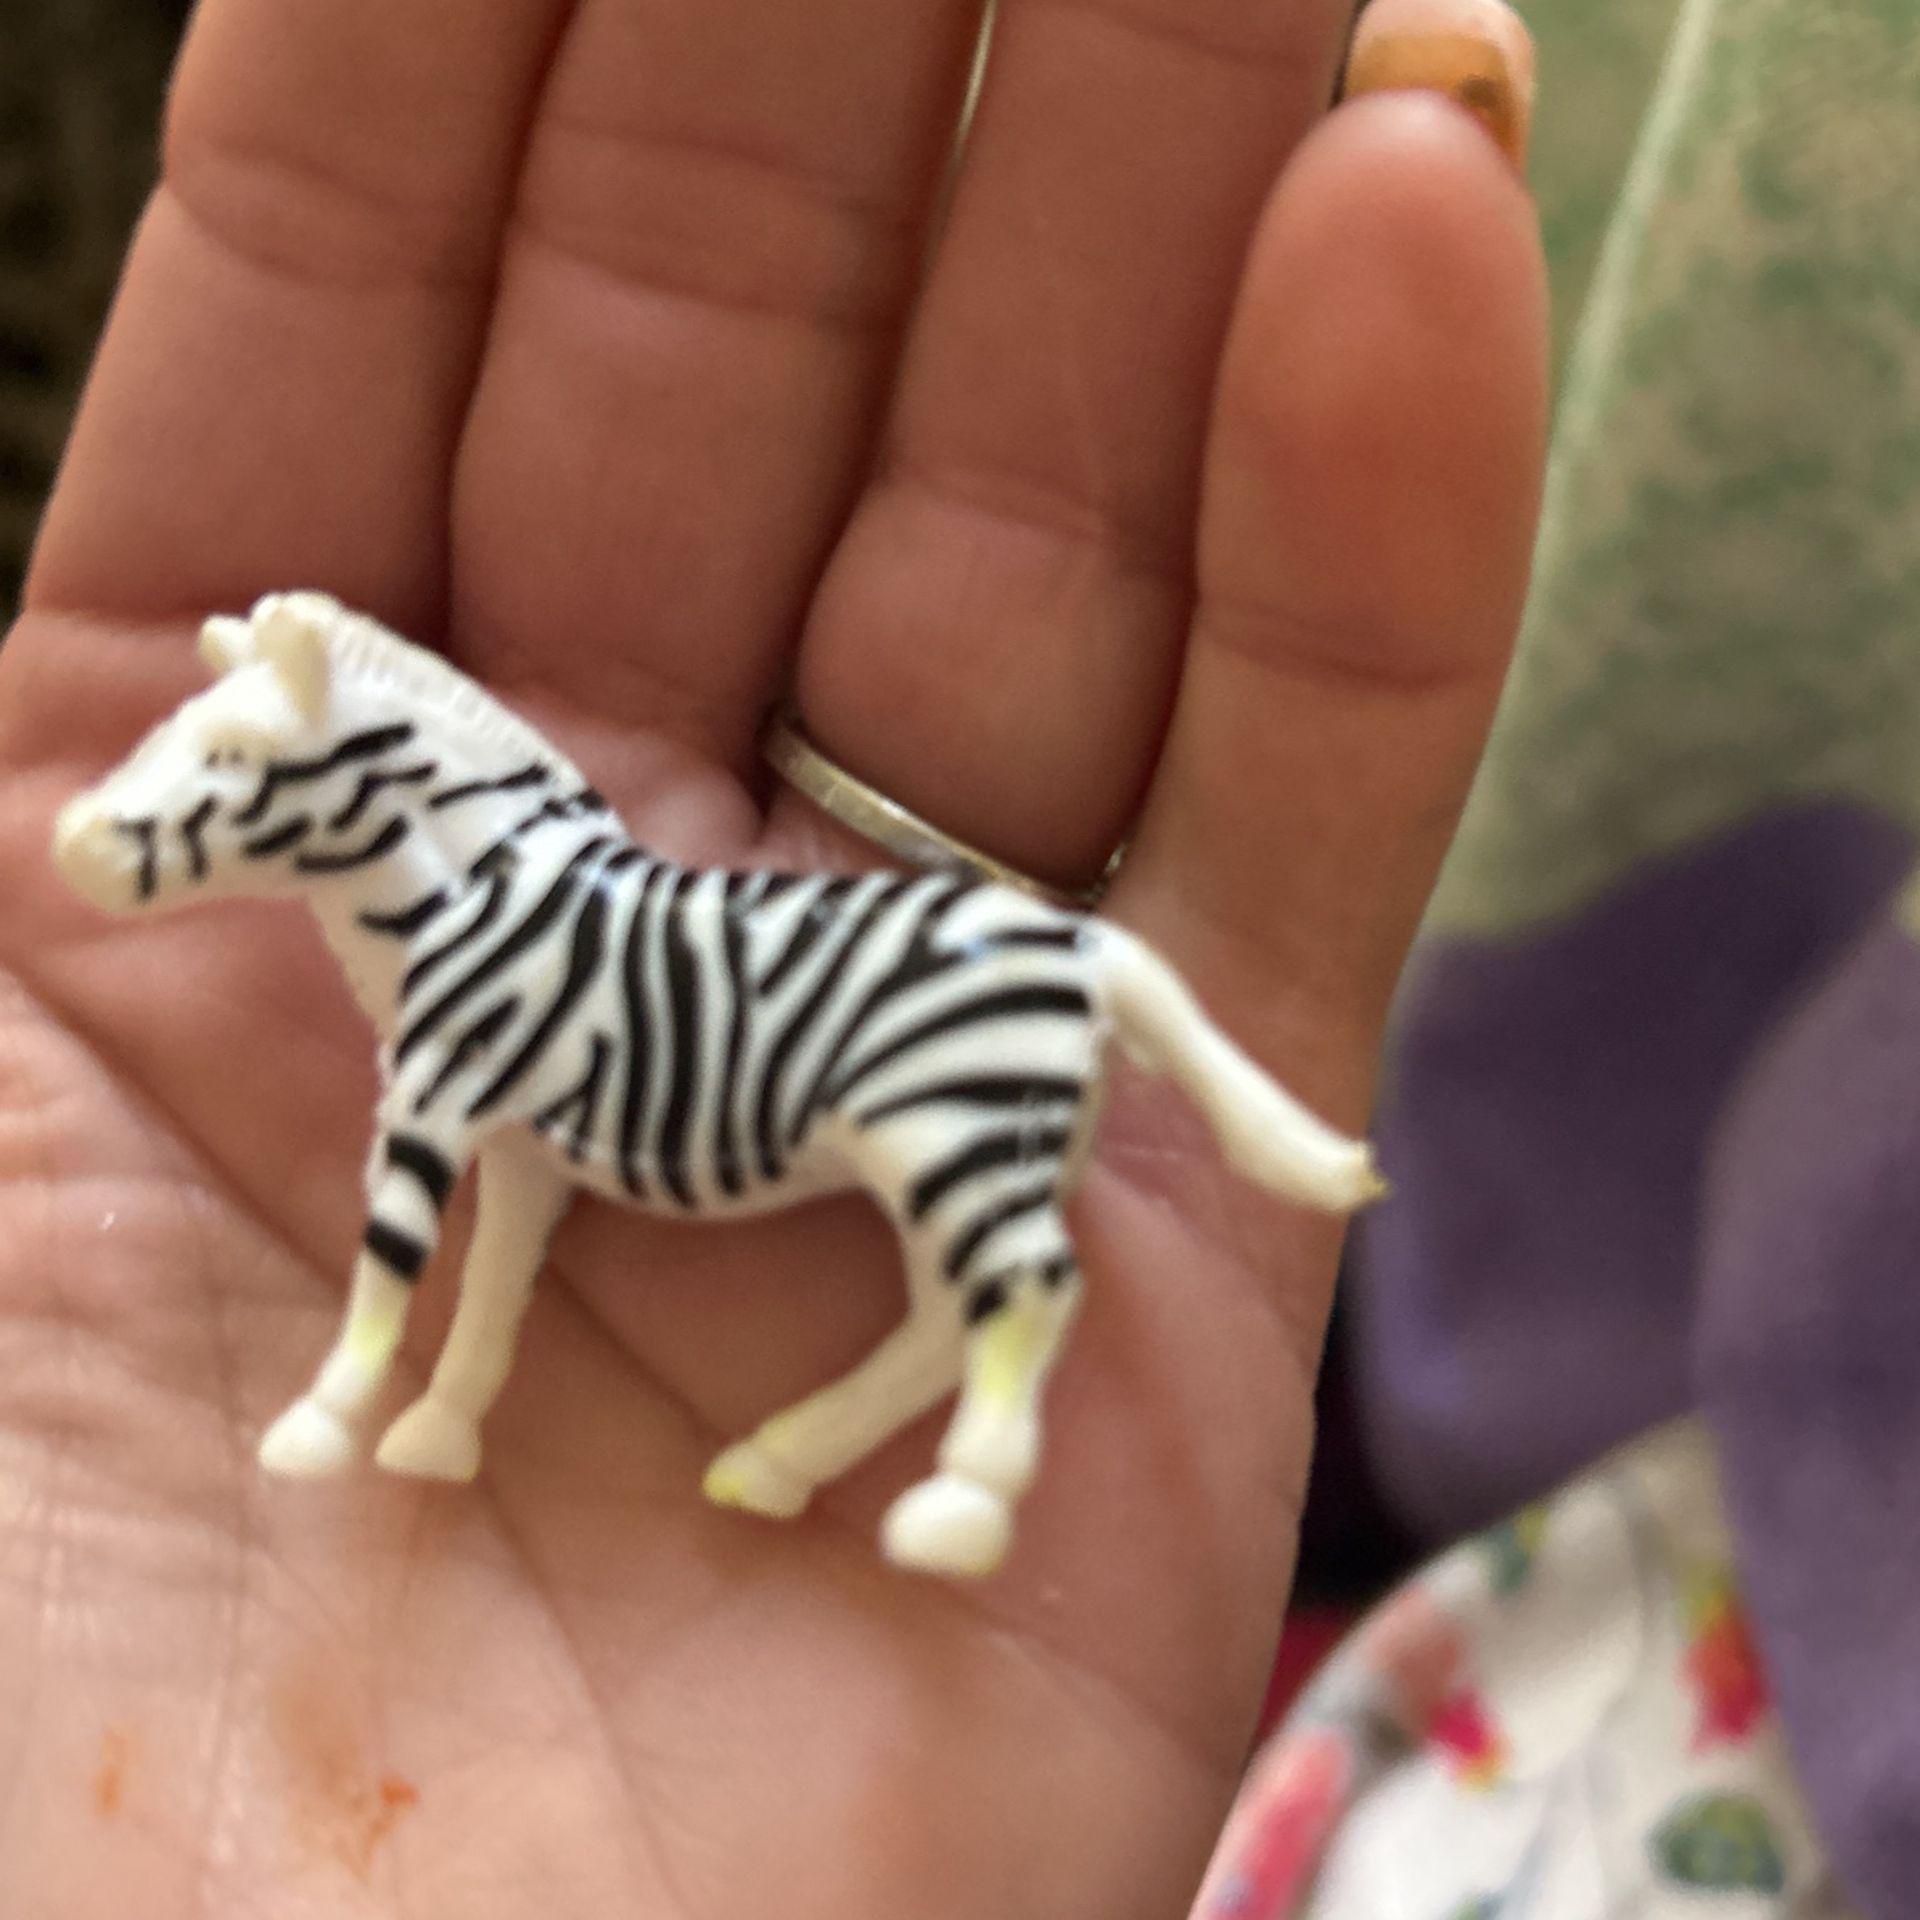 Miniature Zebra Fits In The Palm Of Your